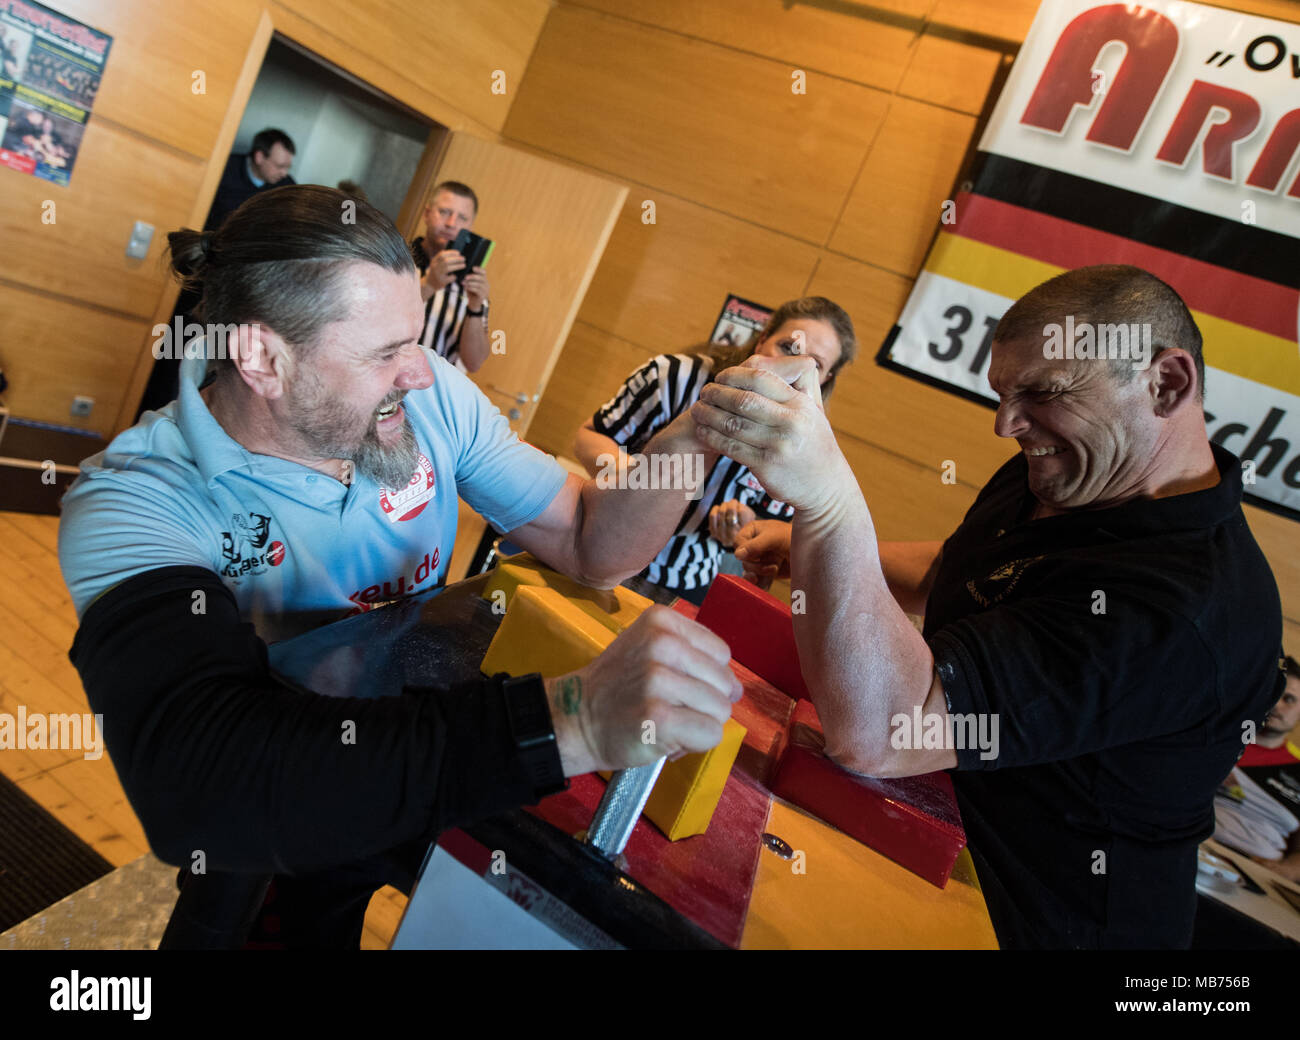 07 April 2018, Germany, Rodenbach: Andreas Berend from Eisleben (L) and Stefan Metka from Hanau standing across from each other whilst armwrestling. Around 100 athletes are taking part in the 31st championship. Photo: Andreas Arnold/dpa Stock Photo